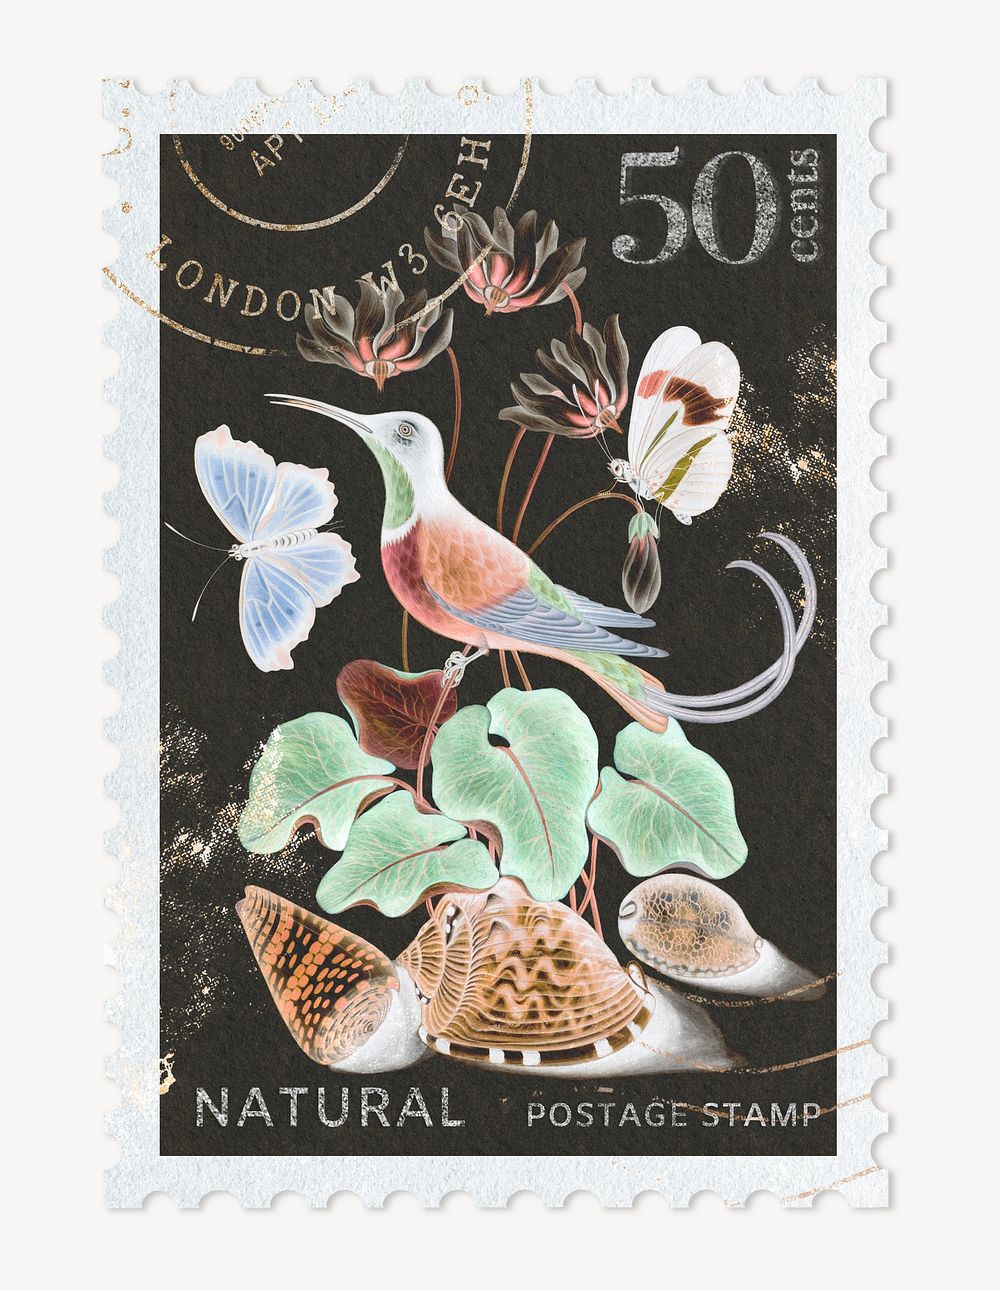 Nature postage stamp, aesthetic animal graphic